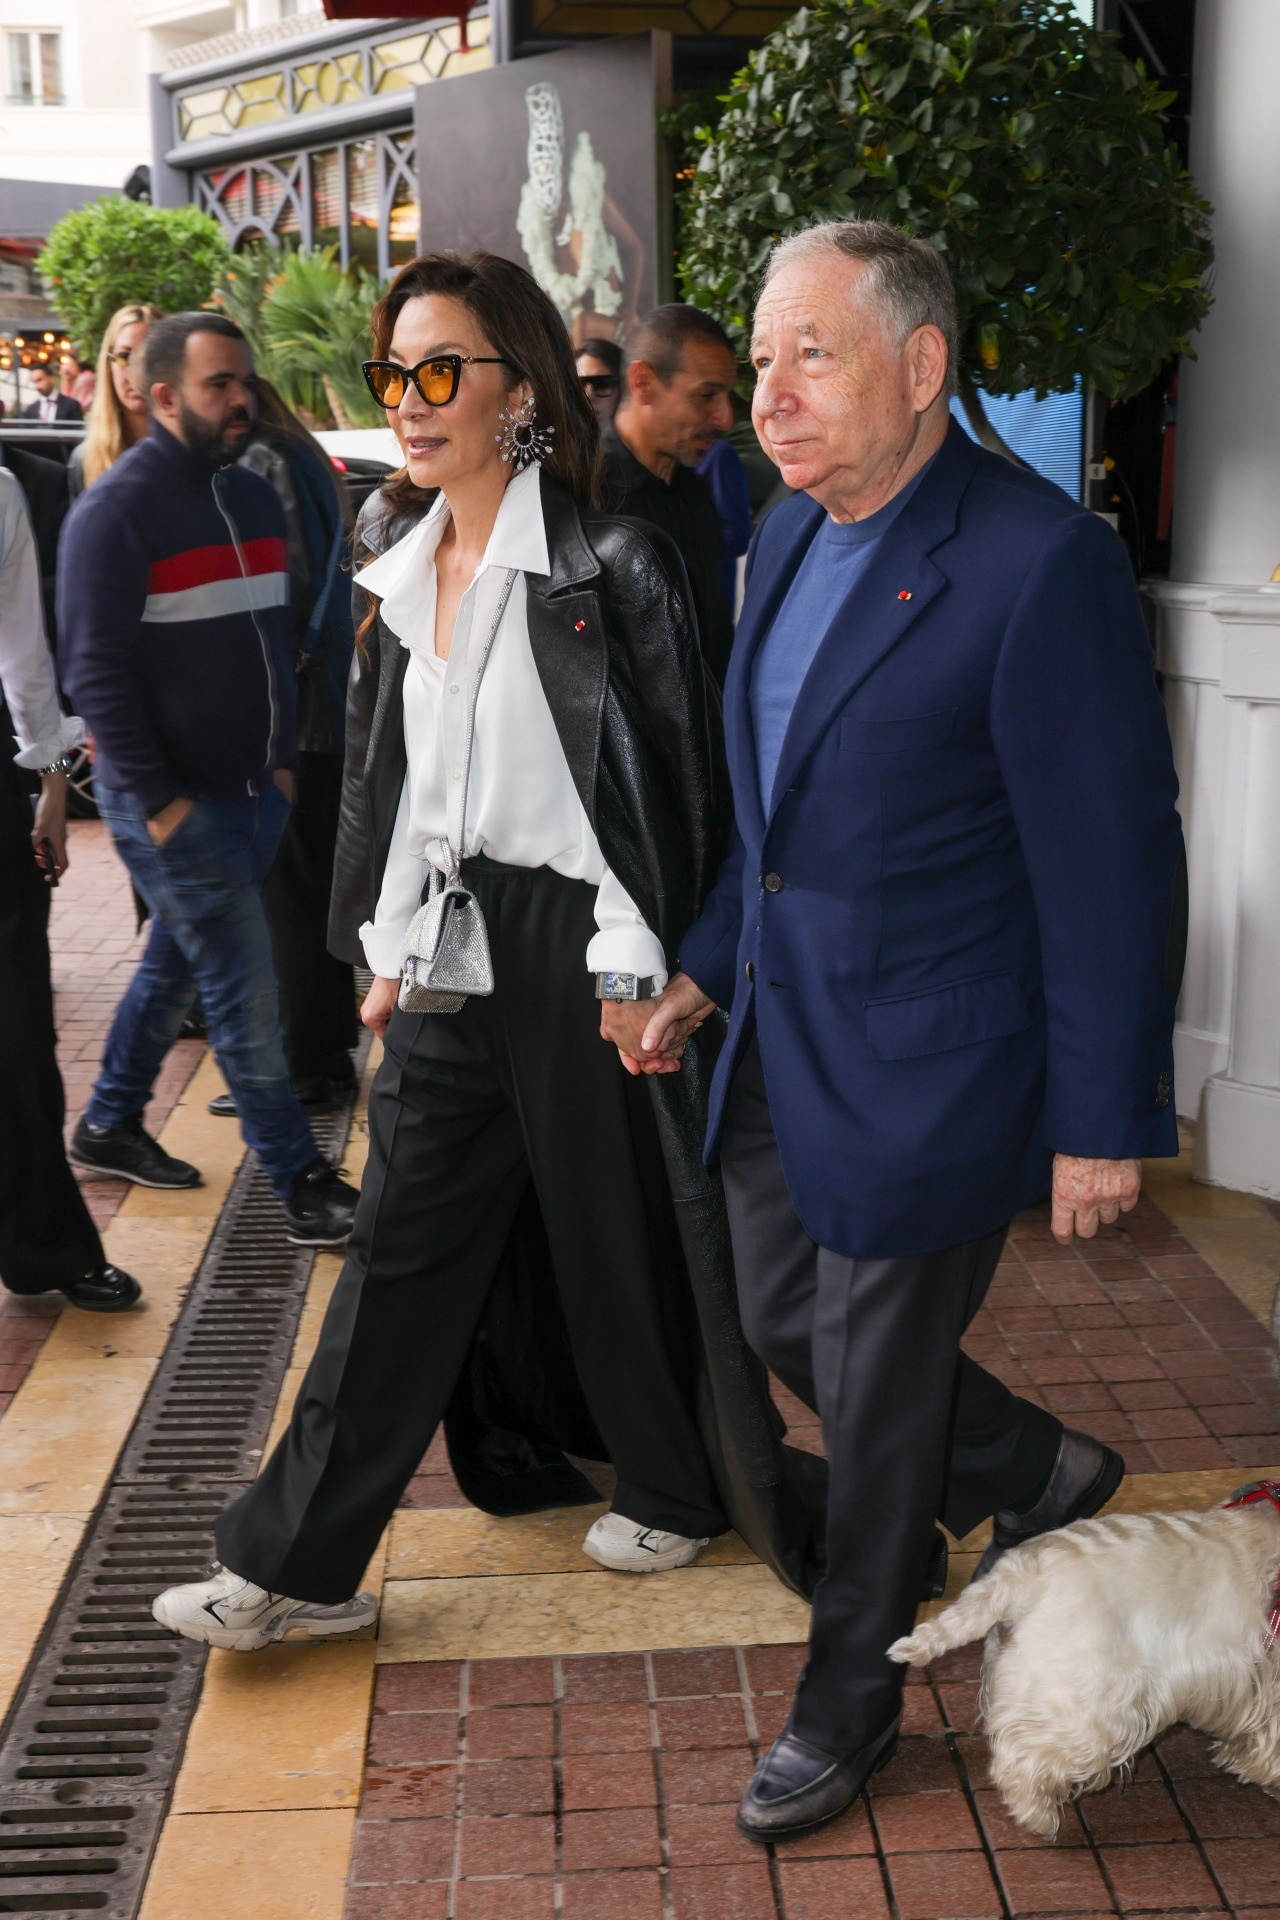 <p>And mixing the effortlessness of Cannes street style with the contemporary edge of streetwear? Why, none other than the Academy Award-winning Michelle Yeoh and film veteran Isabelle Huppert, showing the cool kids how it’s done in leather outerwear and chunky sneakers. Oversized cat-eyes have made frequent appearances in Yeoh’s Cannes closet, which she styled with baggy black trousers, louche white shirts and a silver Balenciaga micro bag. Huppert, on the other hand, pledged her loyalty to the baseball cap in a corduroy piece from Ami. </p>